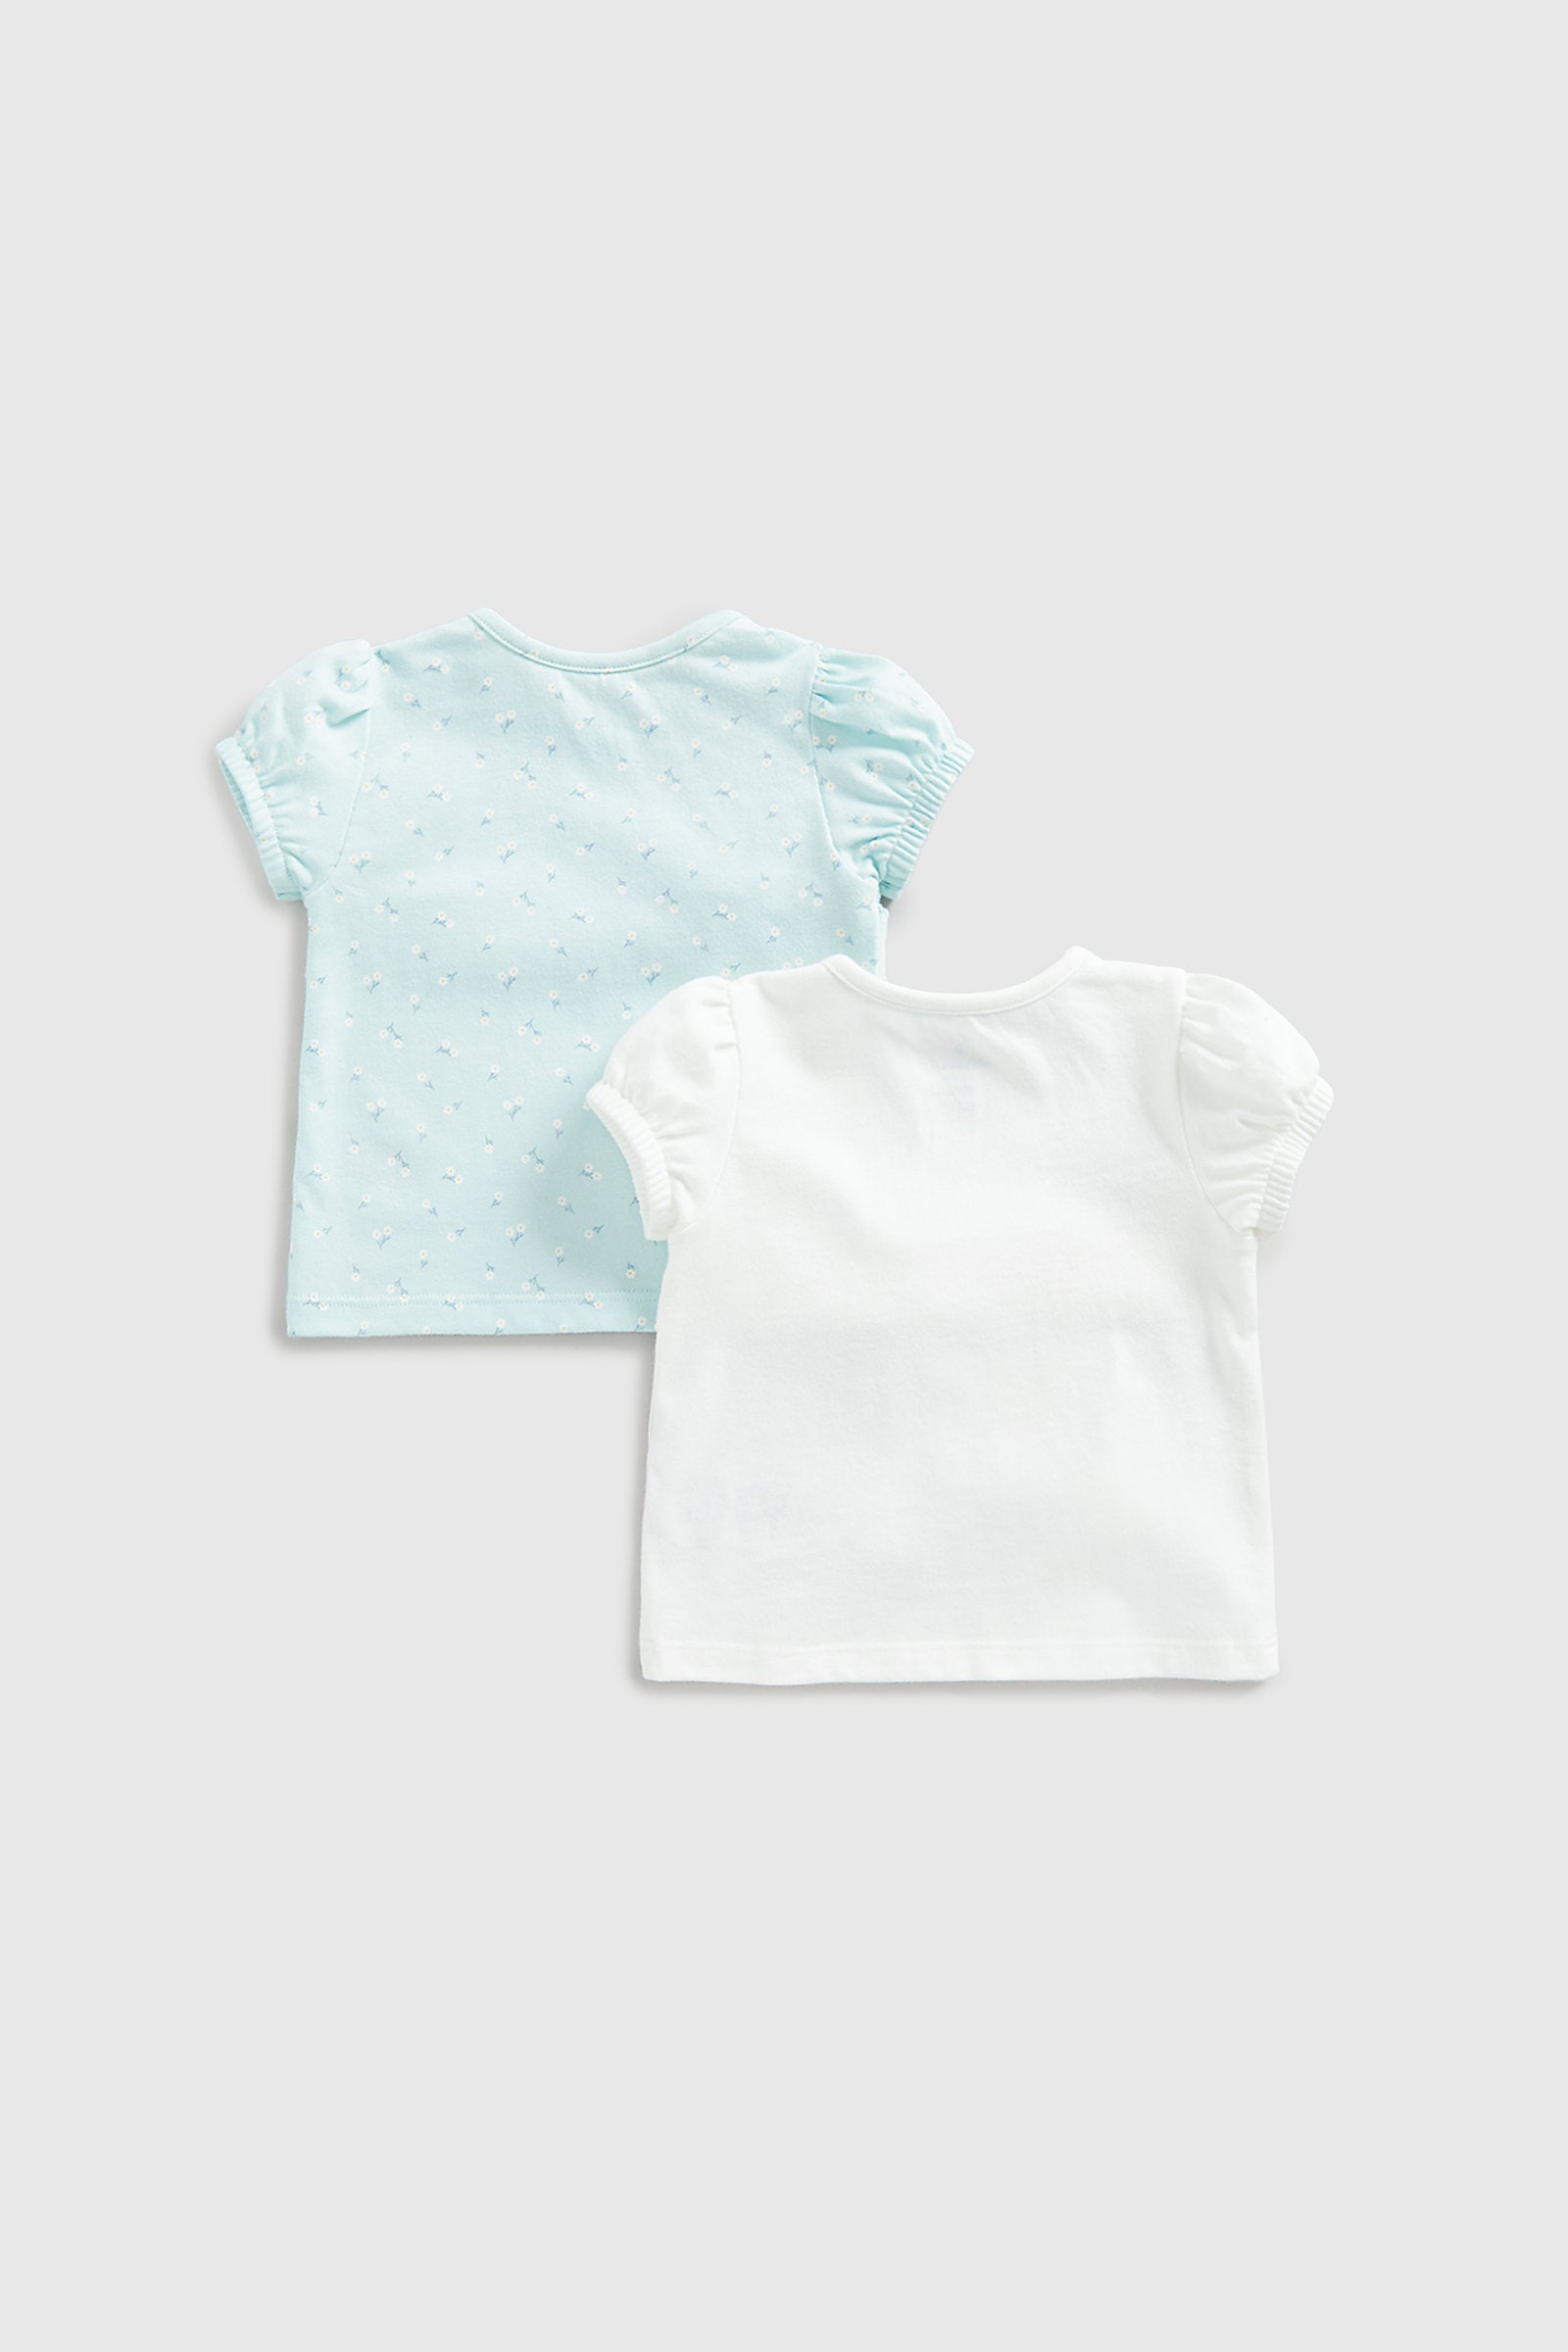 Mothercare Butterfly T-Shirts - 2 Pack